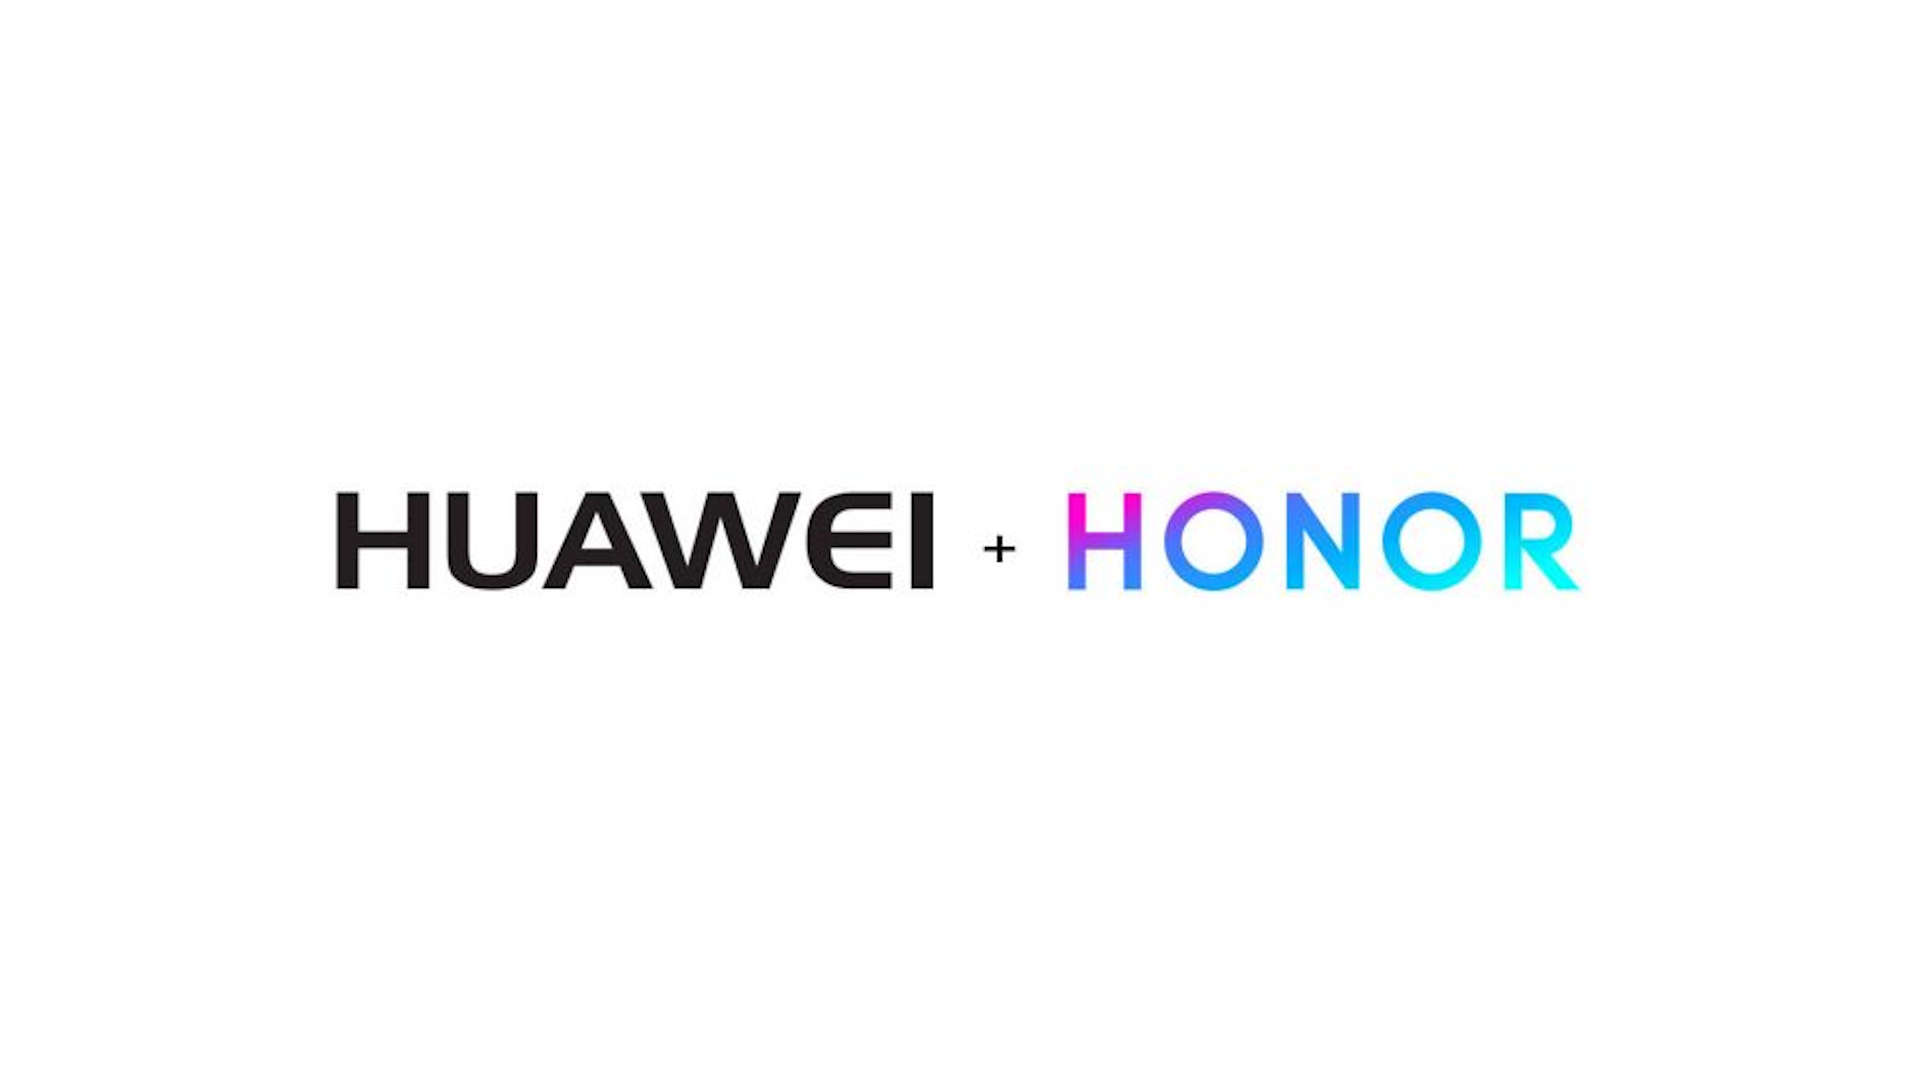 Have you received a small update on Huawei and Honor? Here's what ...